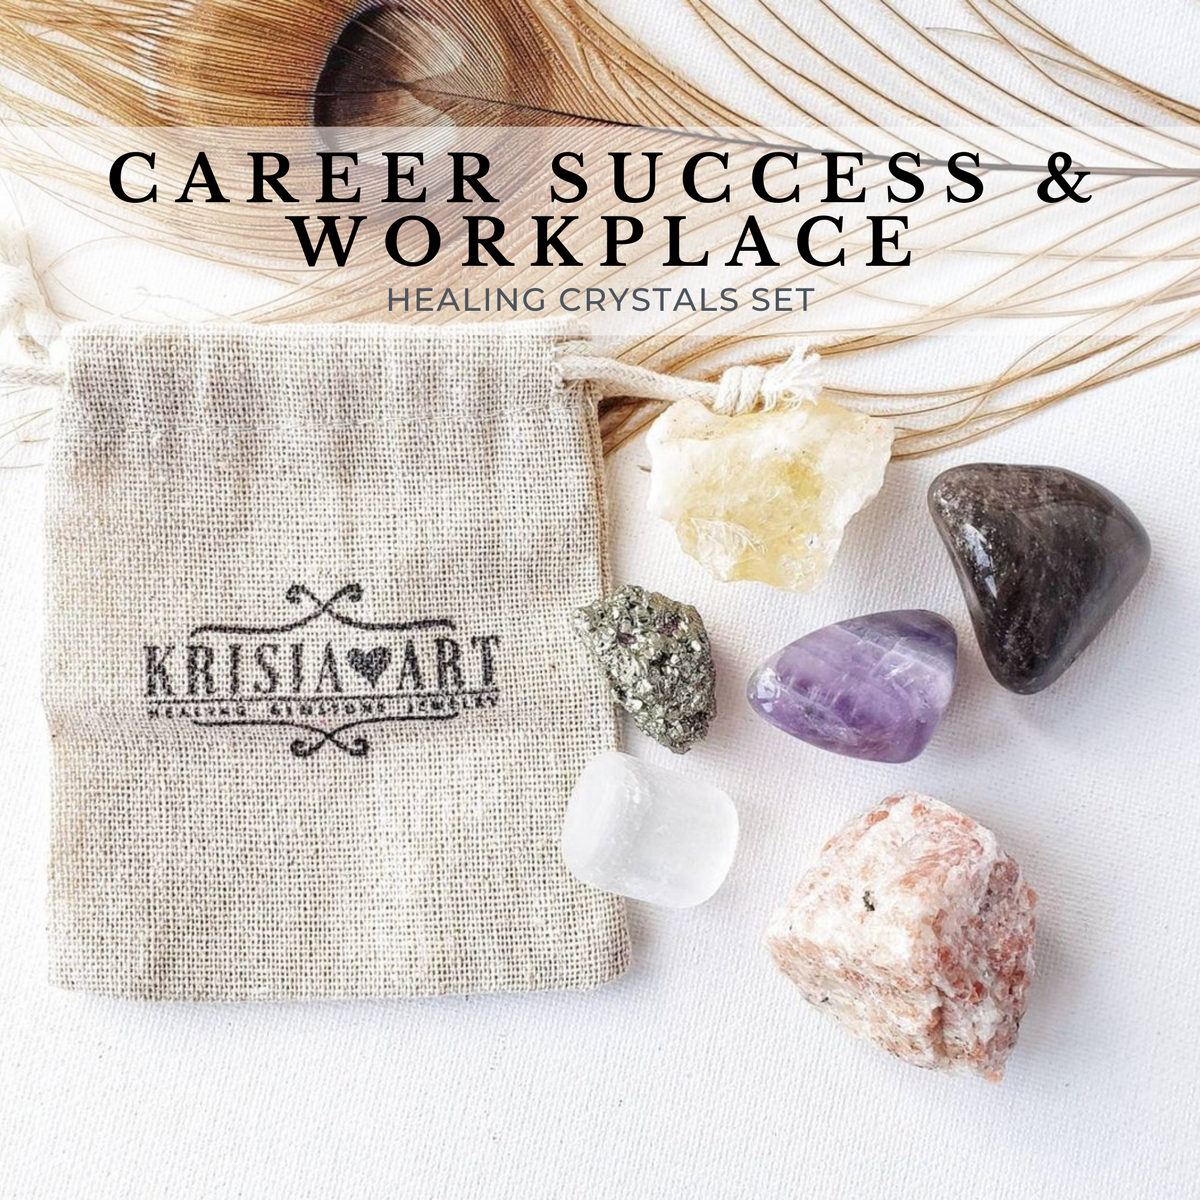 CAREER SUCCESS & Workplace crystal set for promotion and finding your dream job. Amethyst, Citrine, Smoky quartz, Pyrite, Sunstone, Selenite